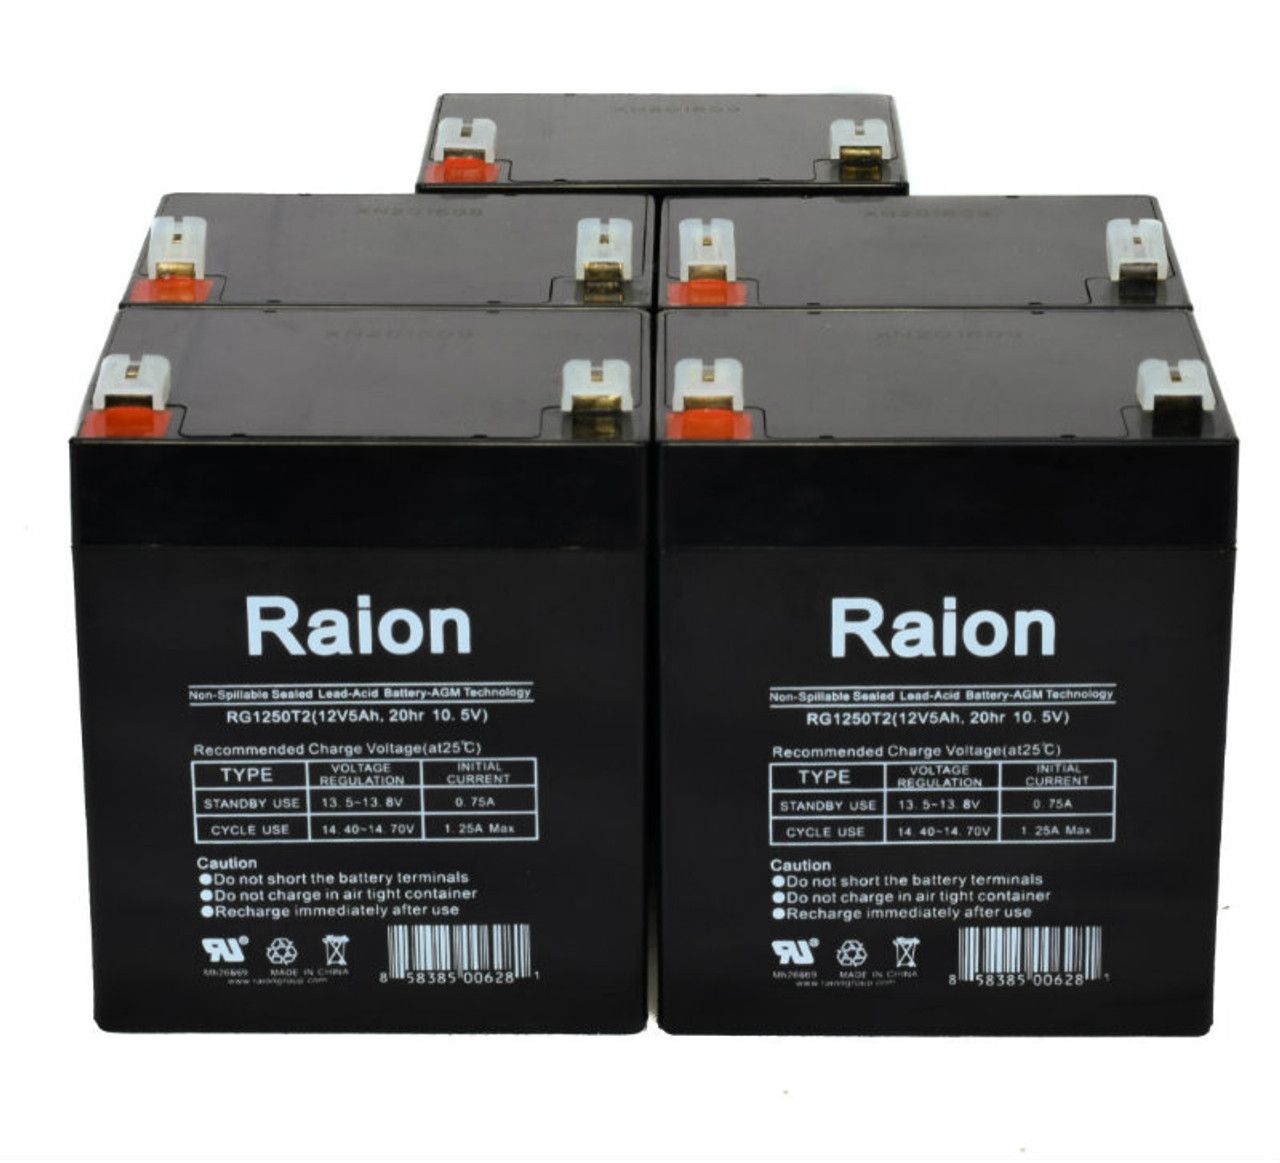 Raion Power RG1250T1 Replacement Fire Alarm Control Panel Battery for Newmox Home Alarm - 5 Pack